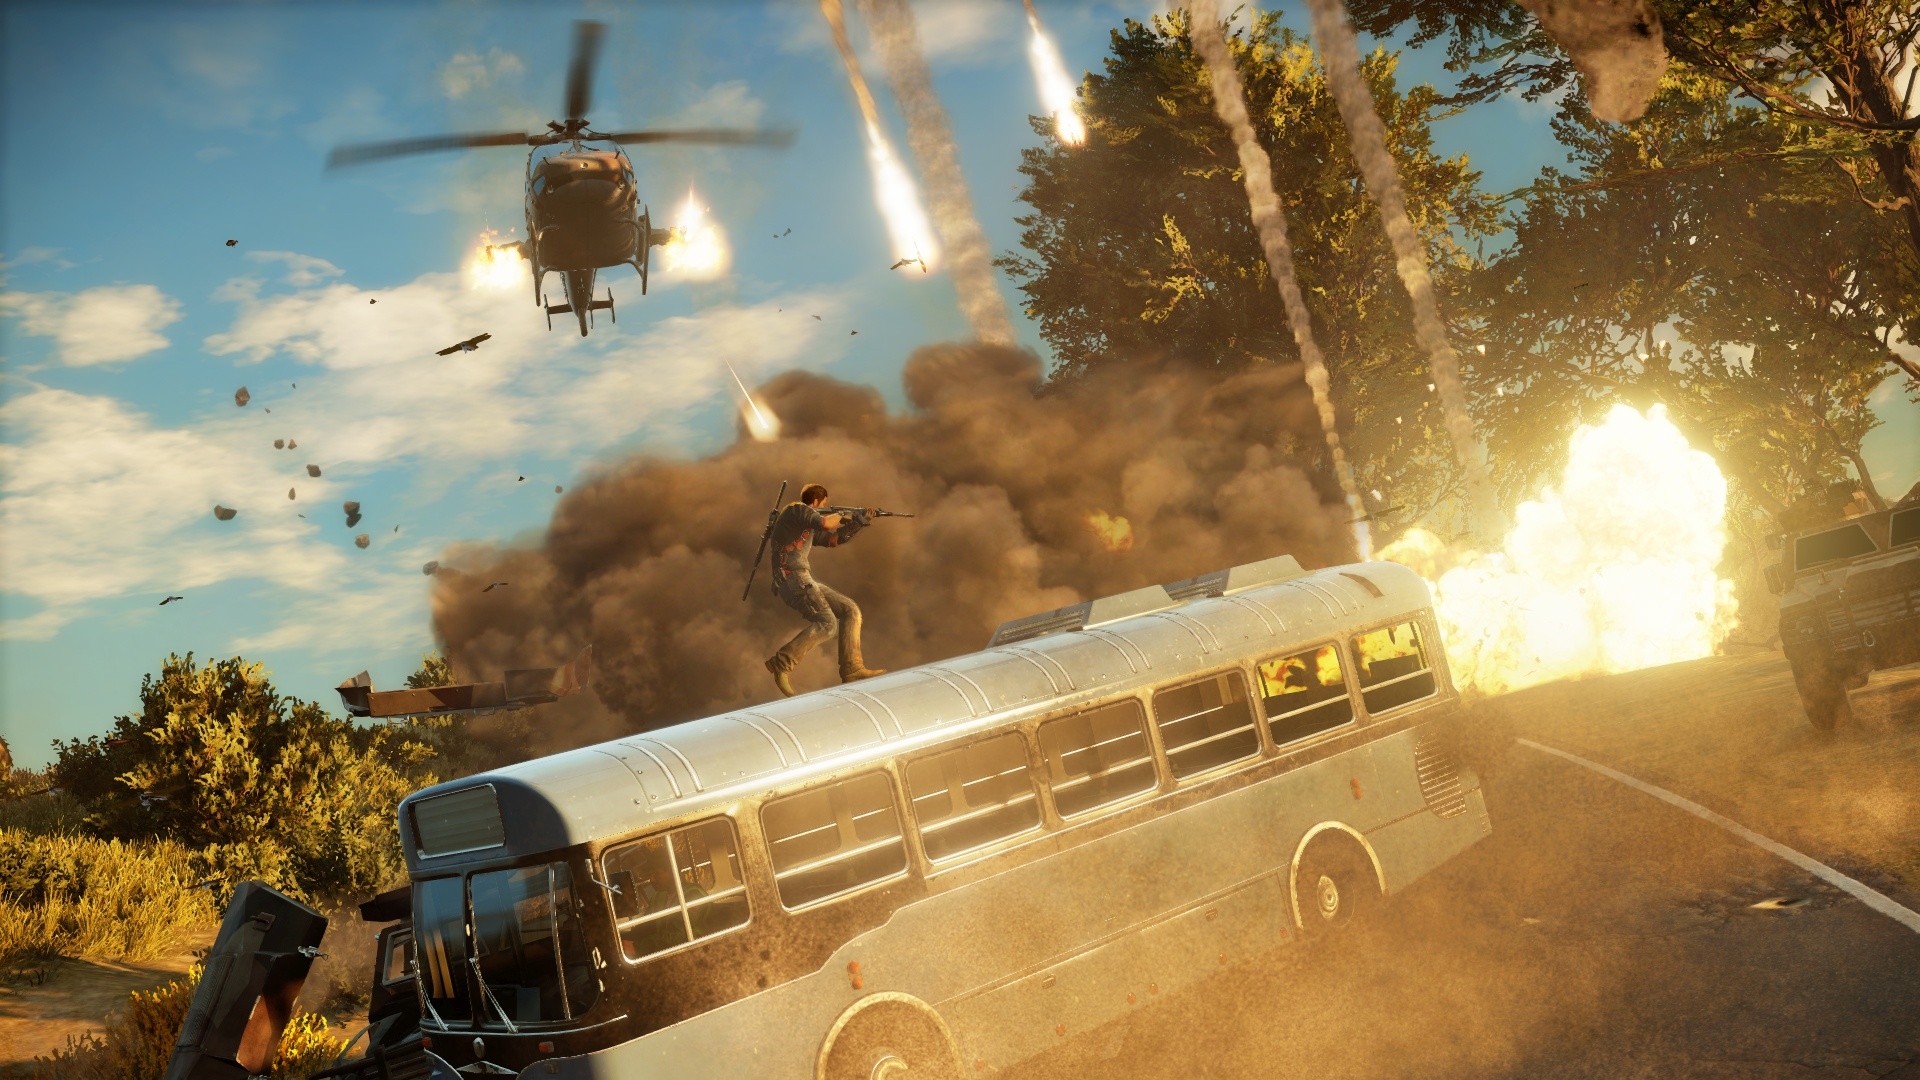 just cause 3 for pc crack